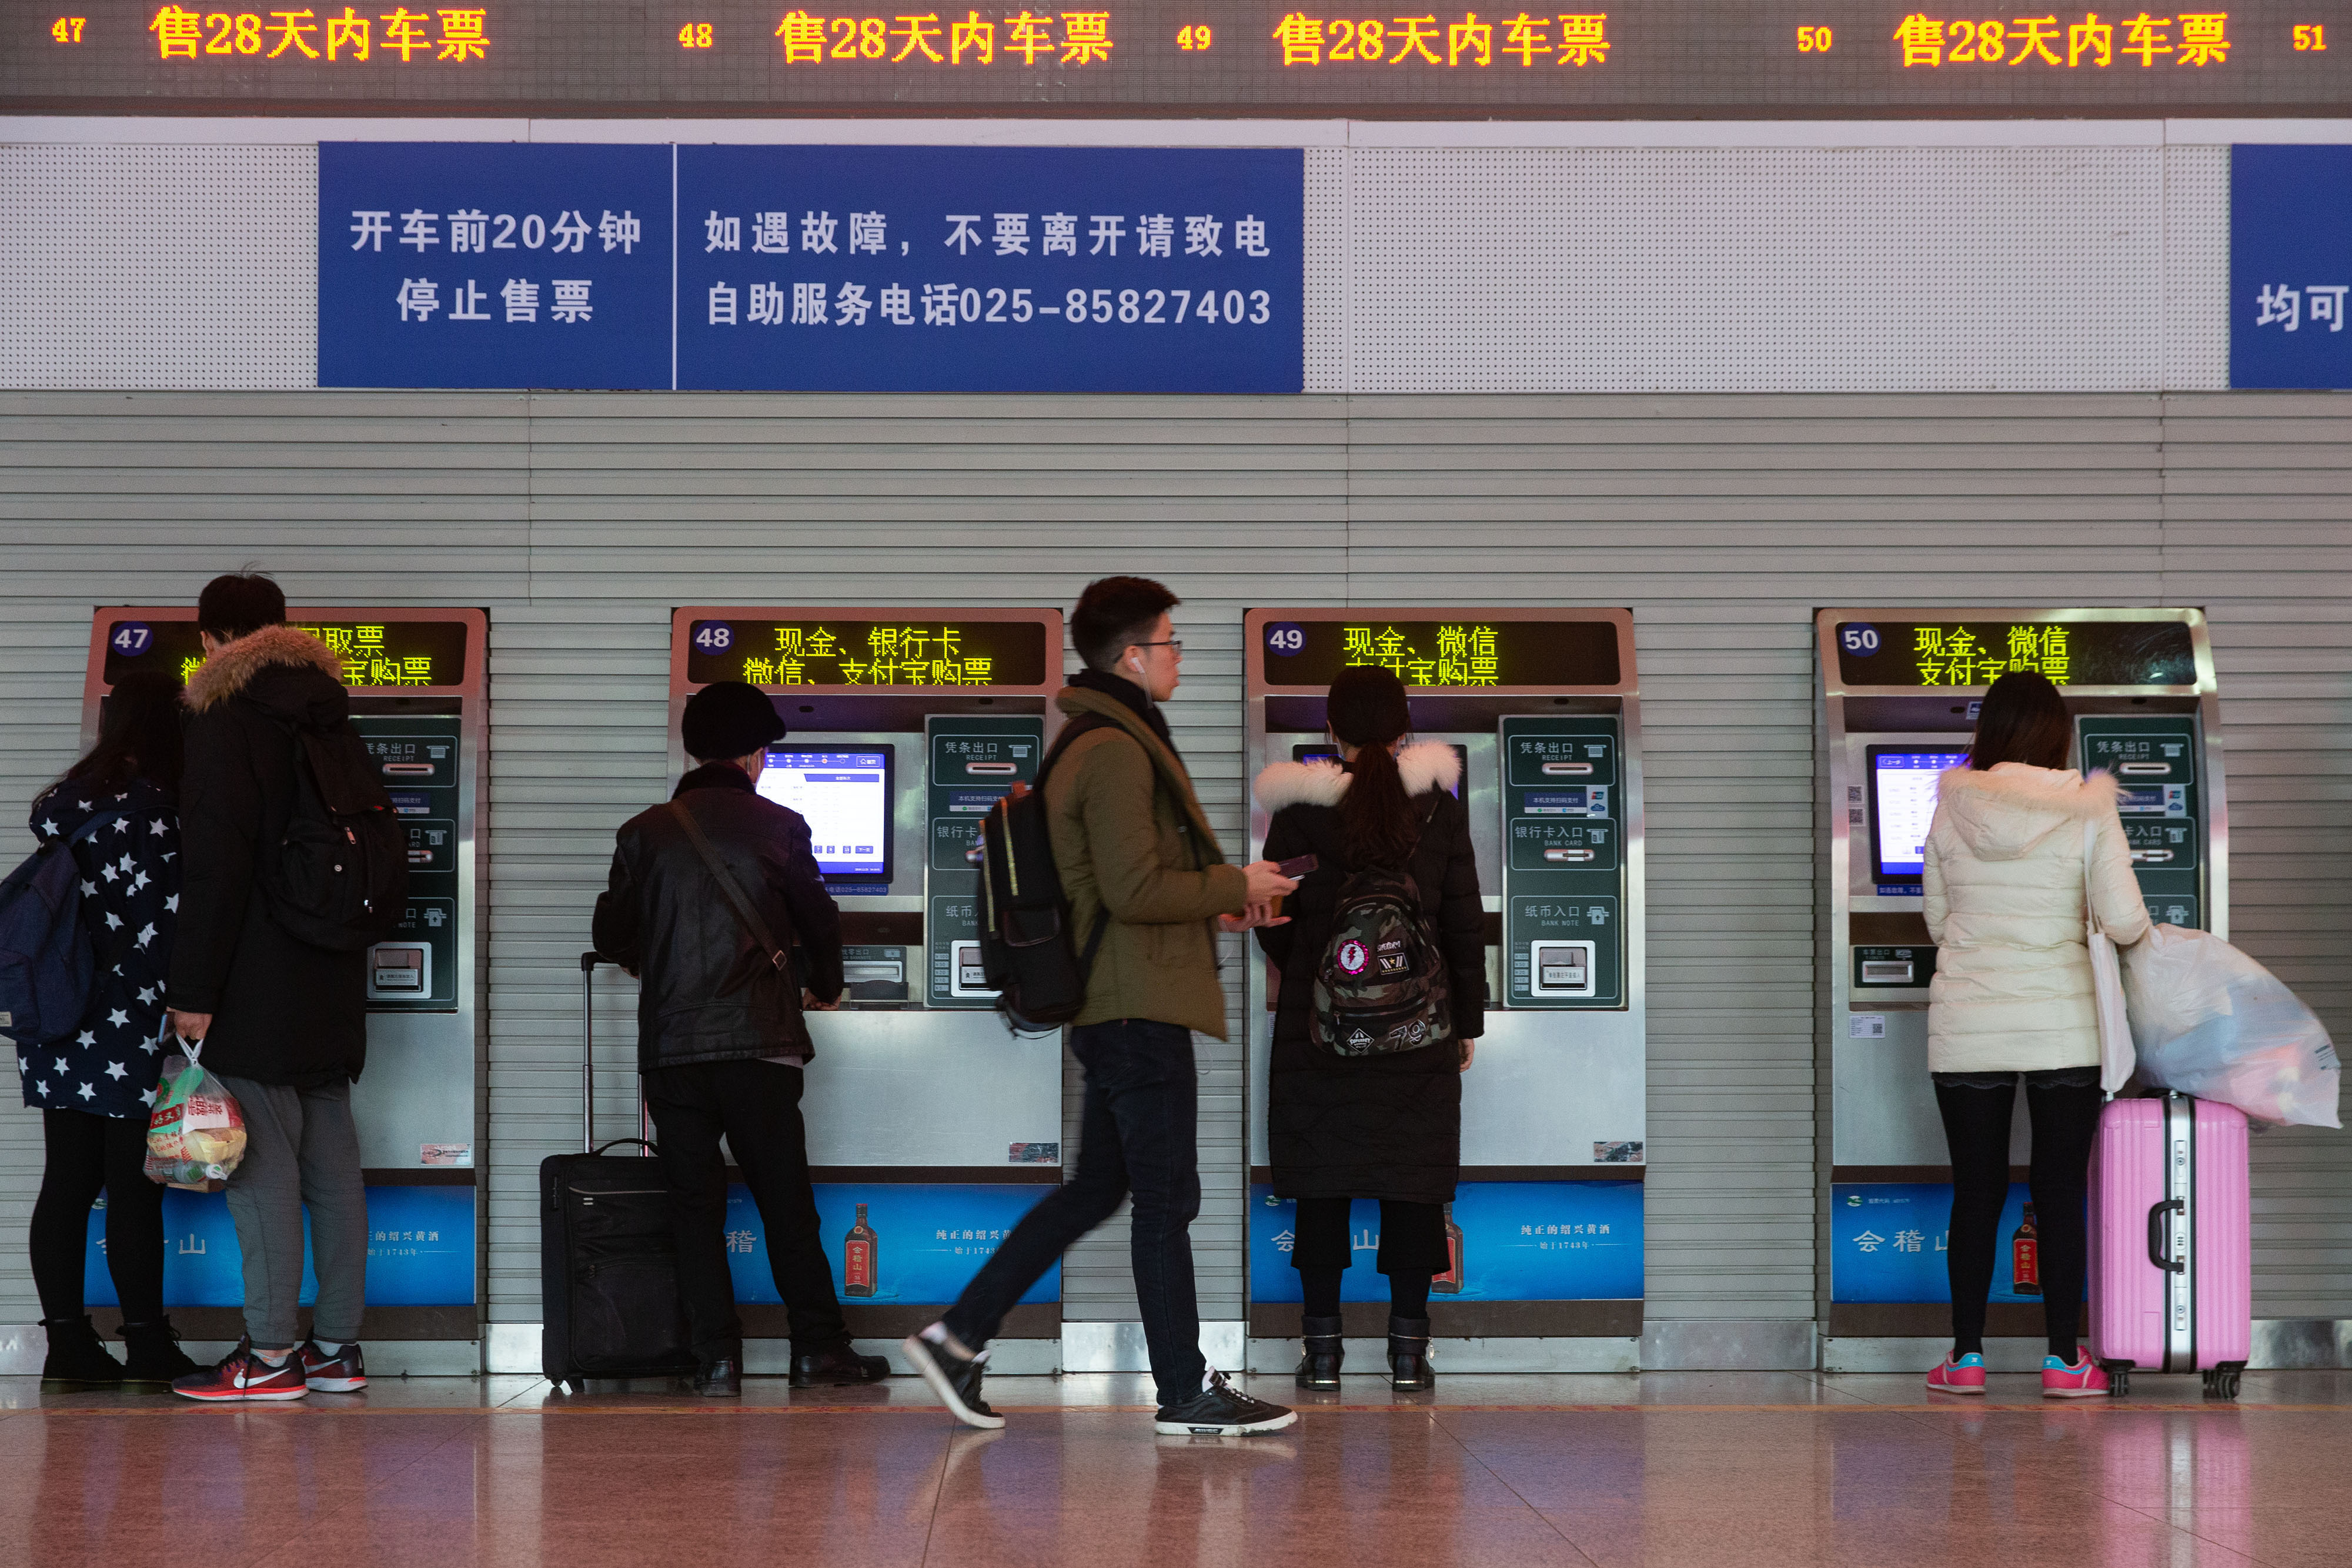 Passengers buy train tickets via ticket vending machines at a train station in Nanjing, Jiangsu Province on December 23, 2018. [File photo: IC]